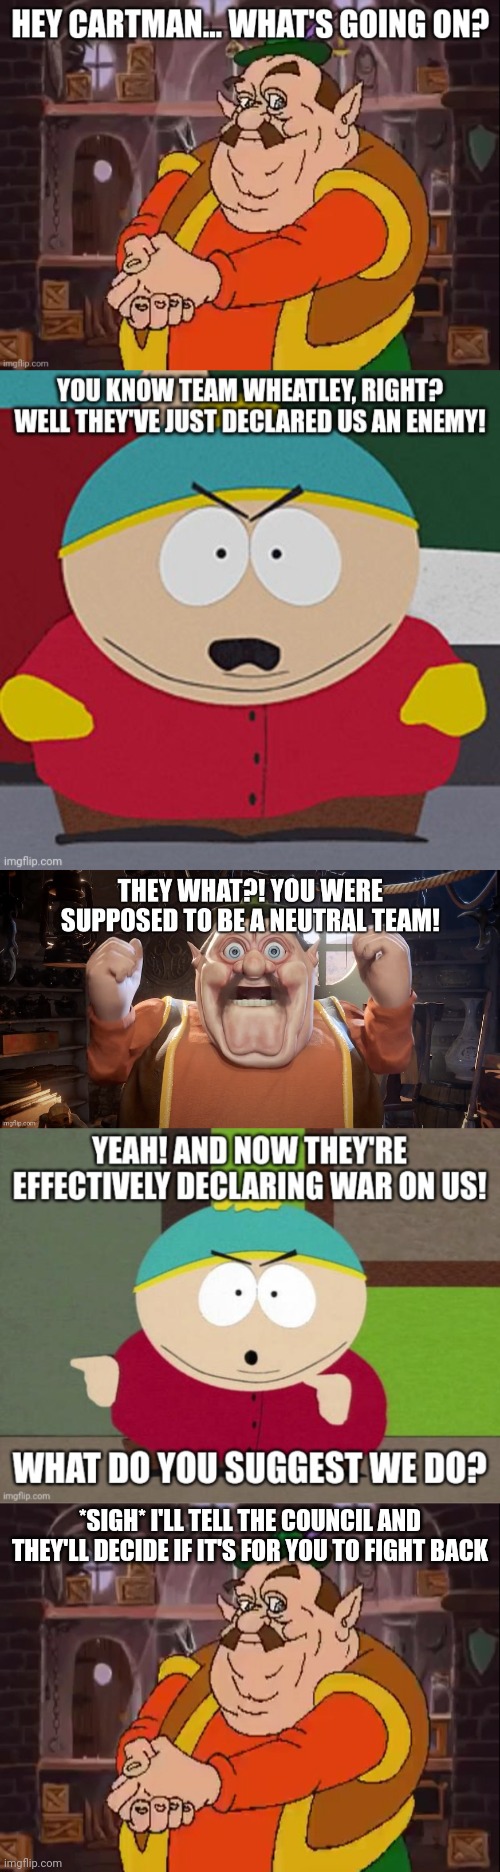 Cartman's reaction to being called "an enemy" | *SIGH* I'LL TELL THE COUNCIL AND THEY'LL DECIDE IF IT'S FOR YOU TO FIGHT BACK | image tagged in morshu | made w/ Imgflip meme maker